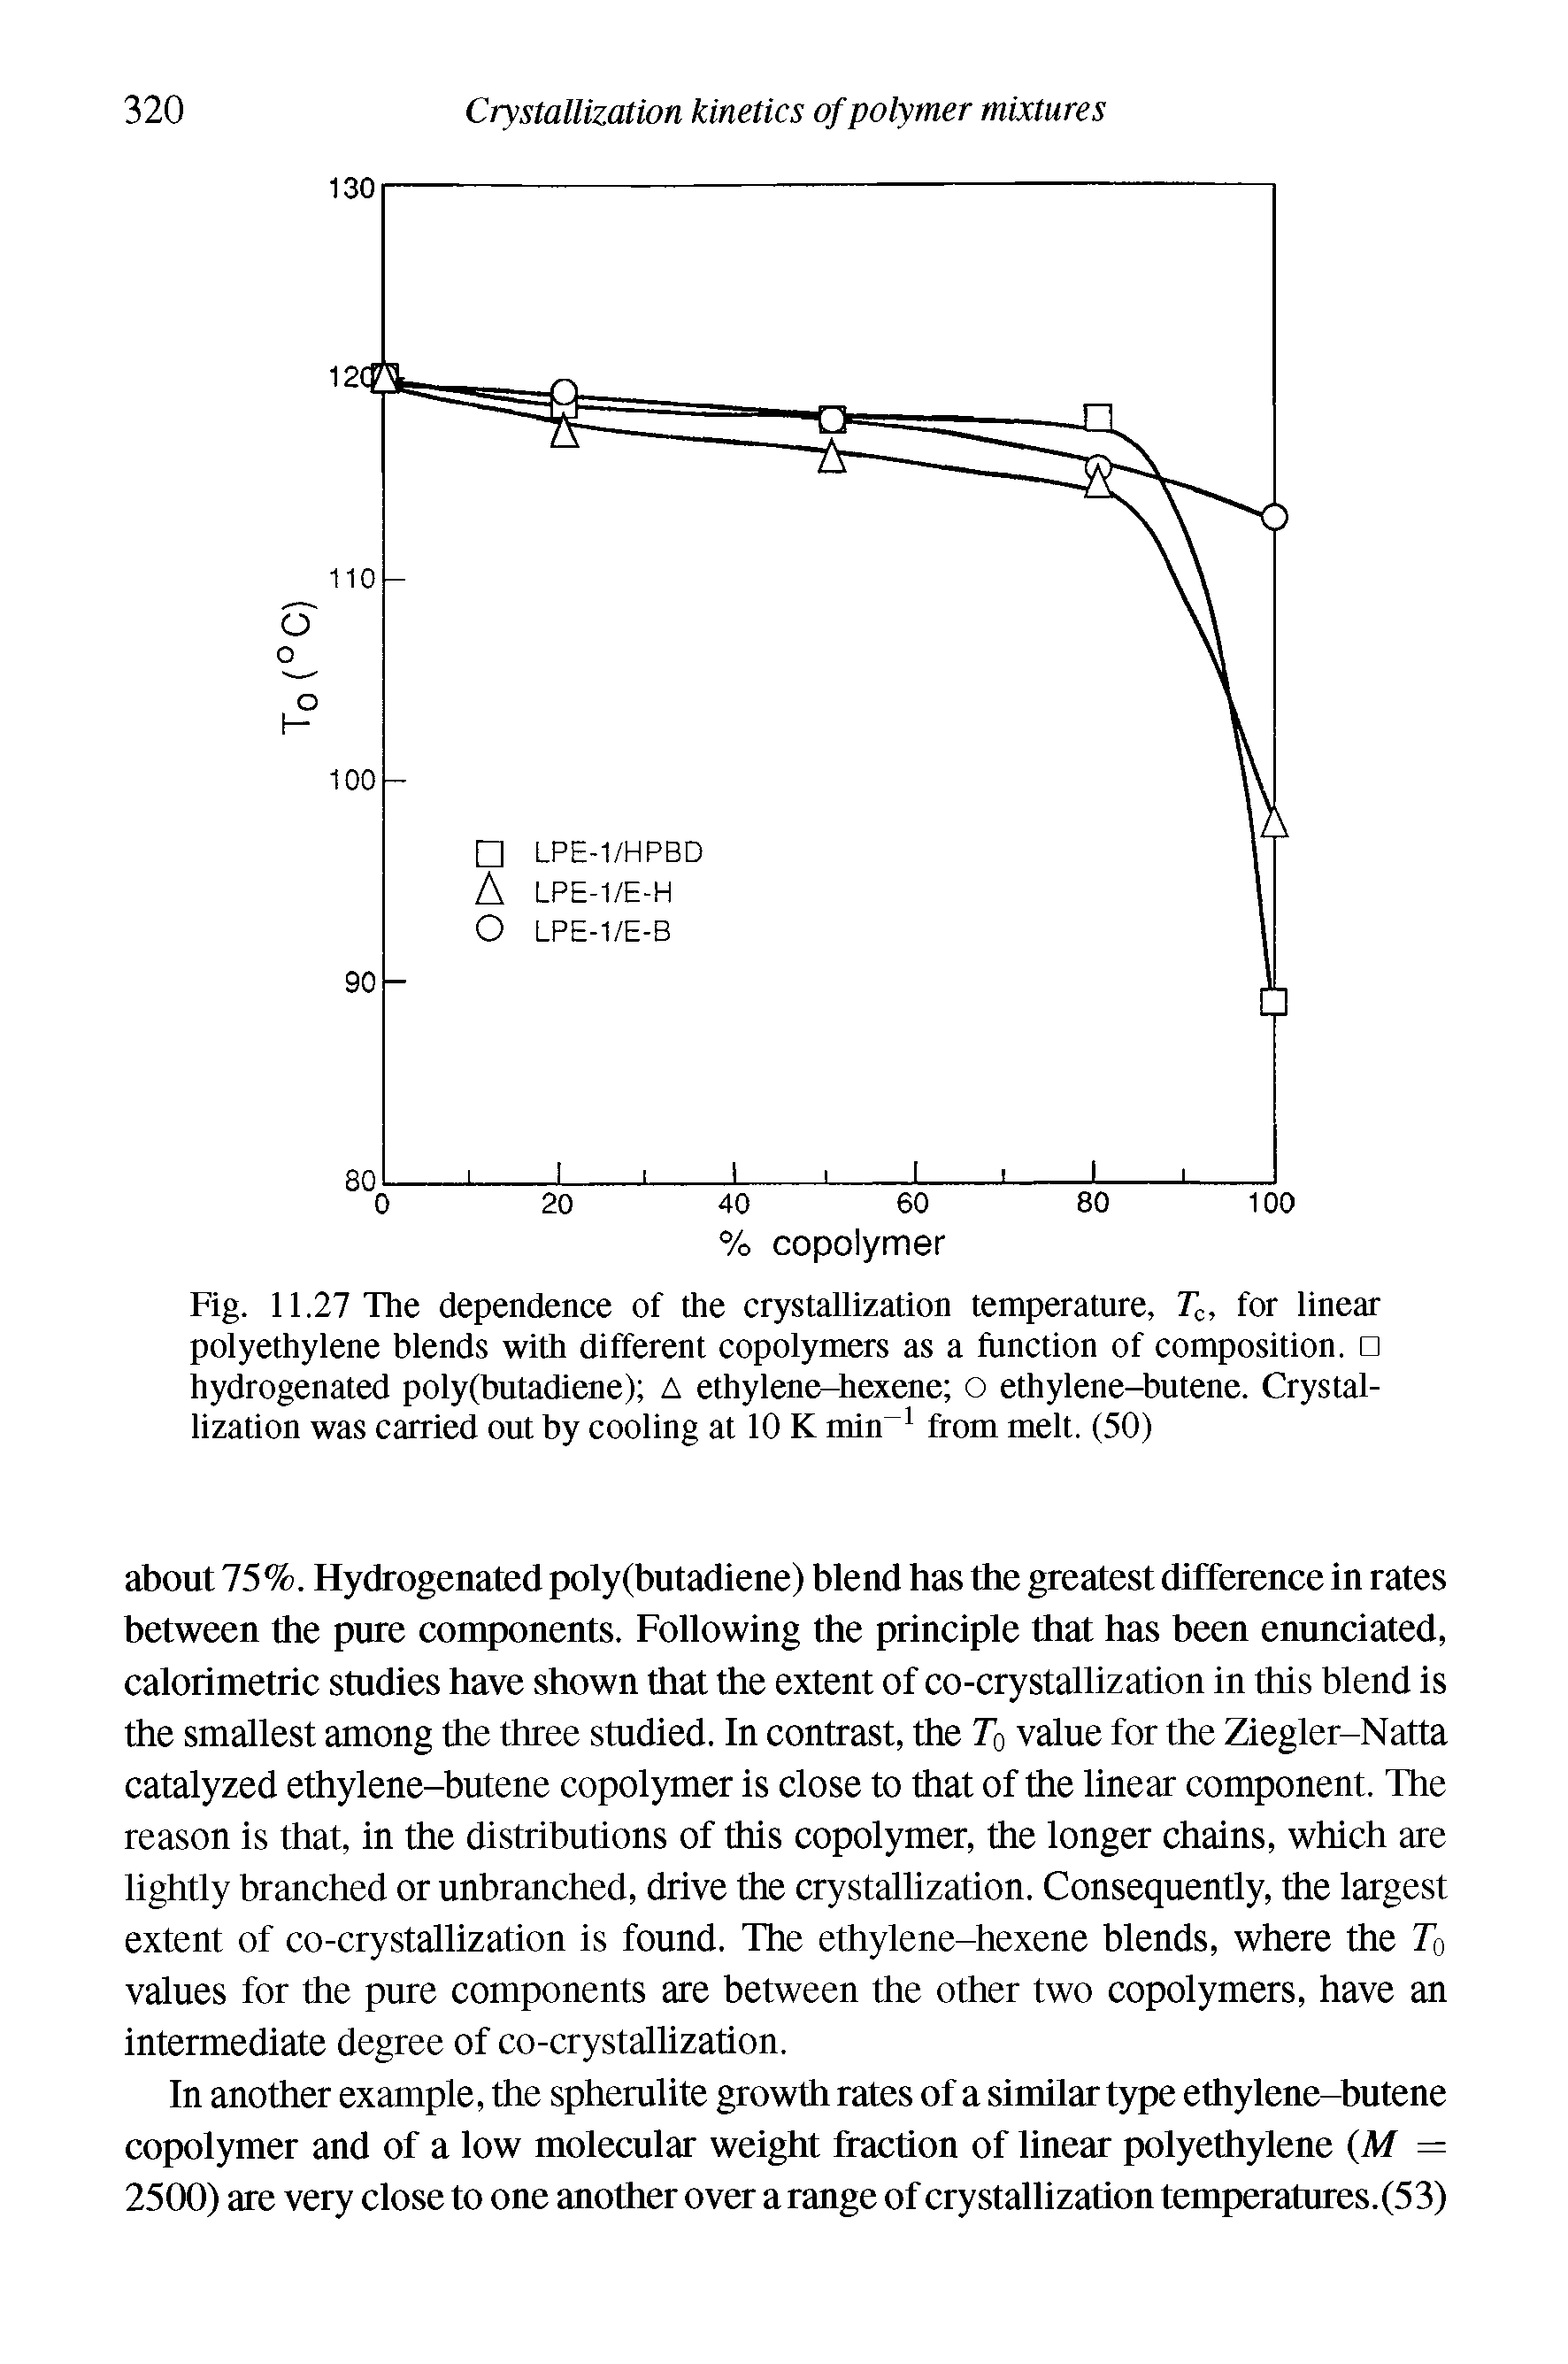 Fig. 11,27 The dependence of the crystallization temperature, Tc, for linear polyethylene blends with different copolymers as a function of composition. hydrogenated poly(butadiene) A ethylene-hexene o ethylene-butene. Crystallization was carried out by cooling at 10 K min from melt. (50)...